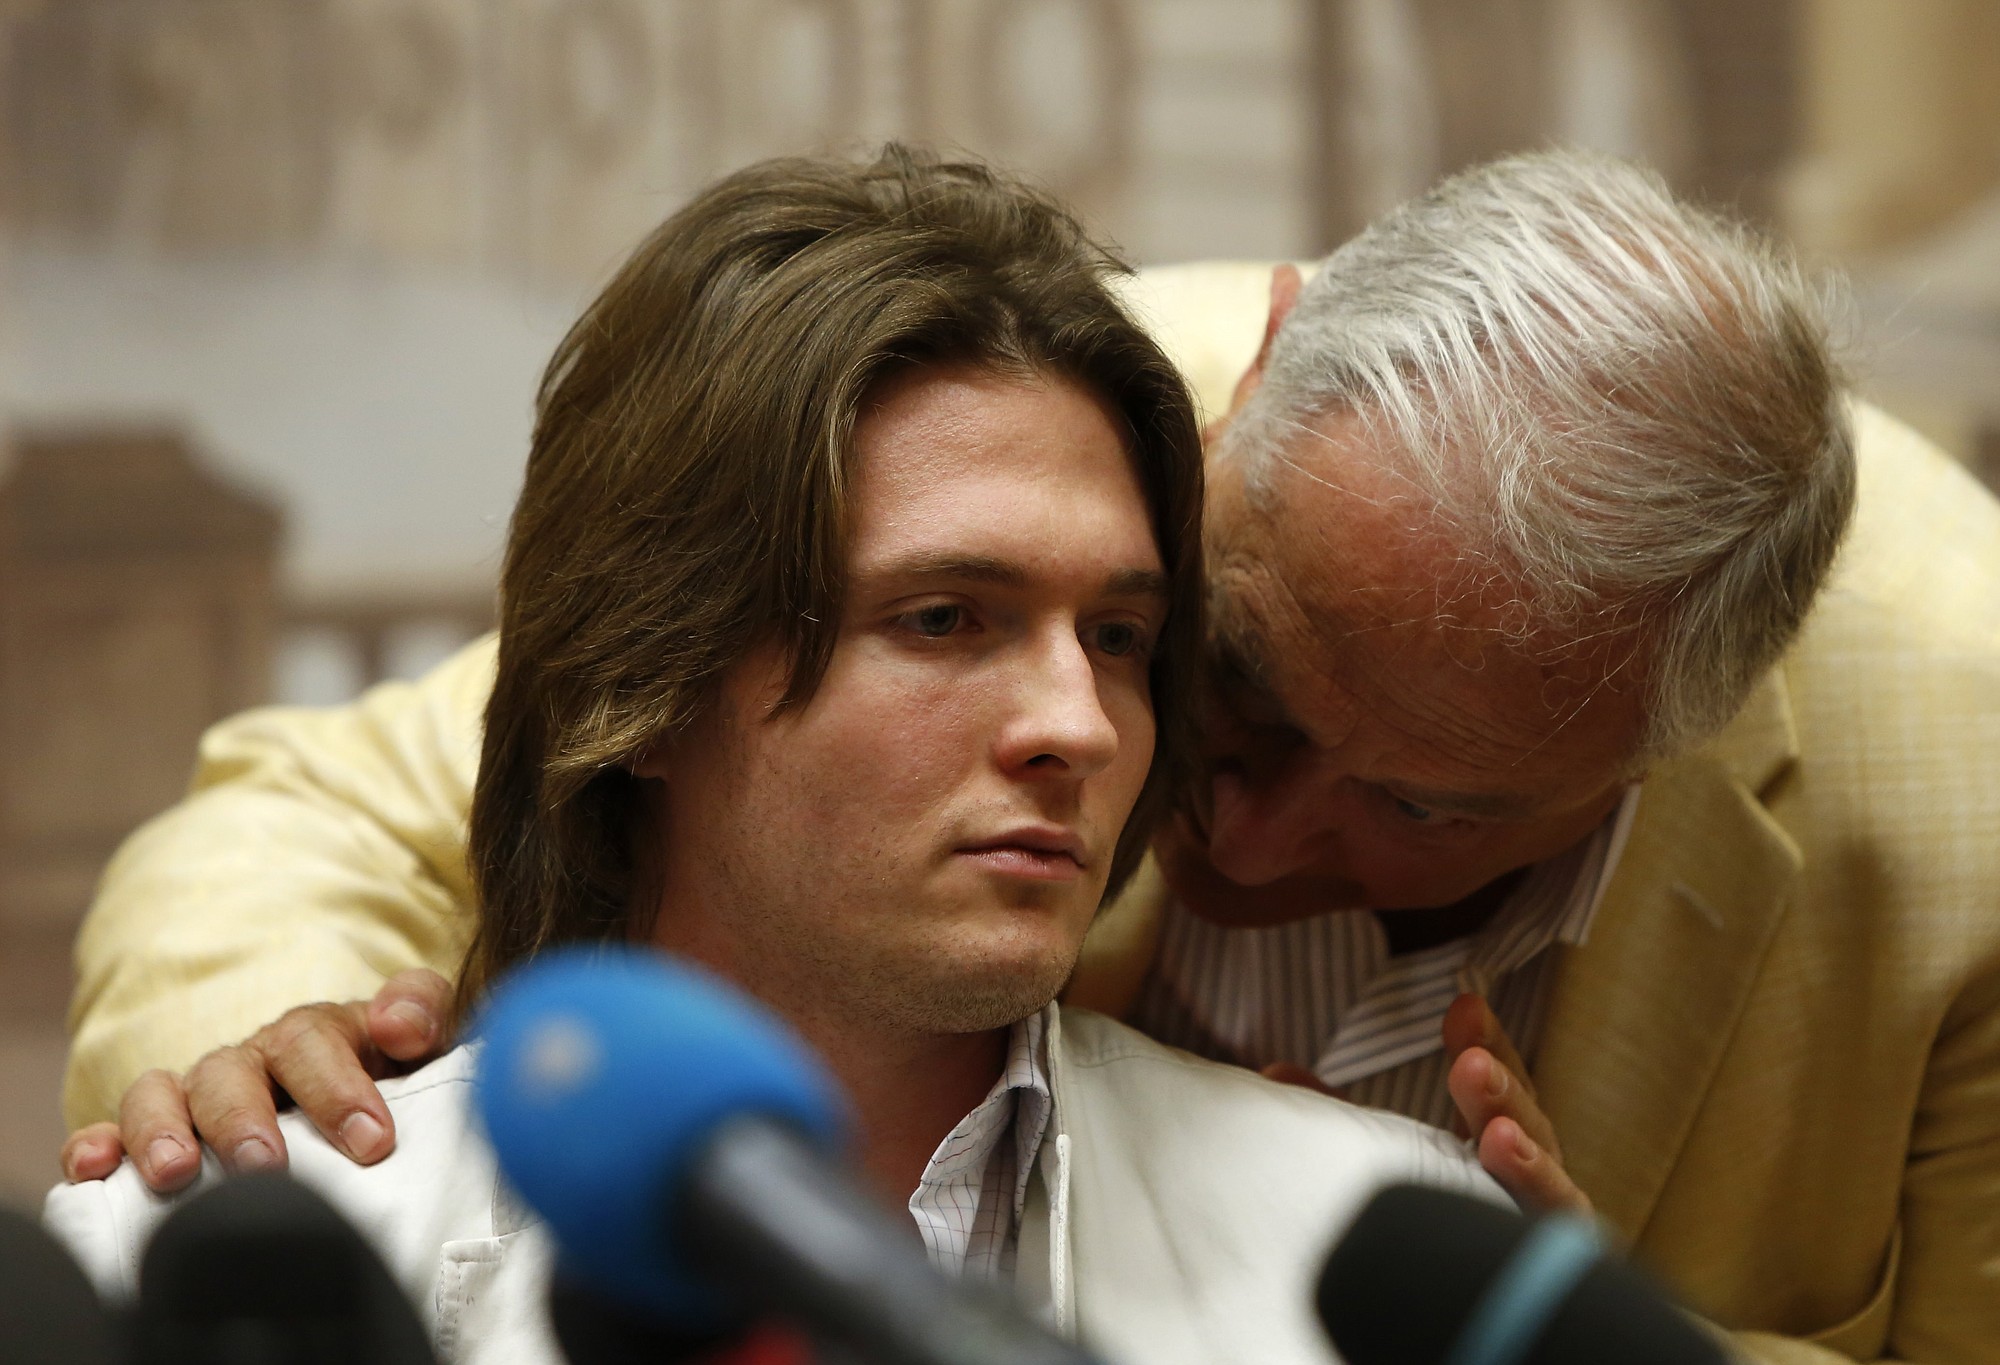 Raffaele Sollecito listens to his father, Francesco Sollecito, right, during a press conference in Rome on Tuesday.